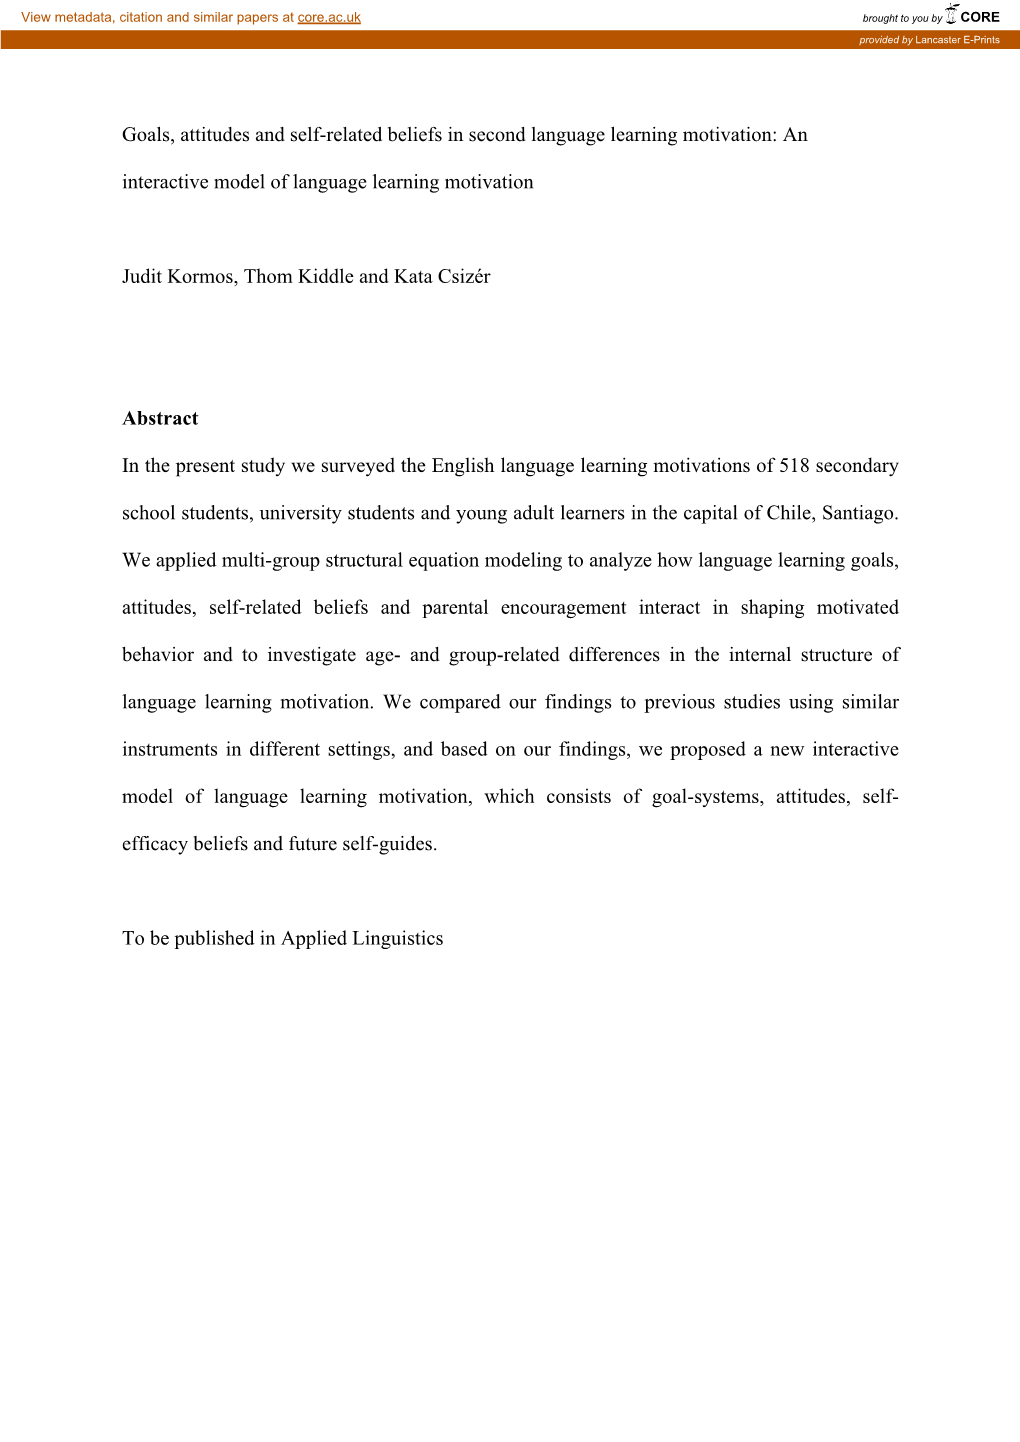 Goals, Attitudes and Self-Related Beliefs in Second Language Learning Motivation: An